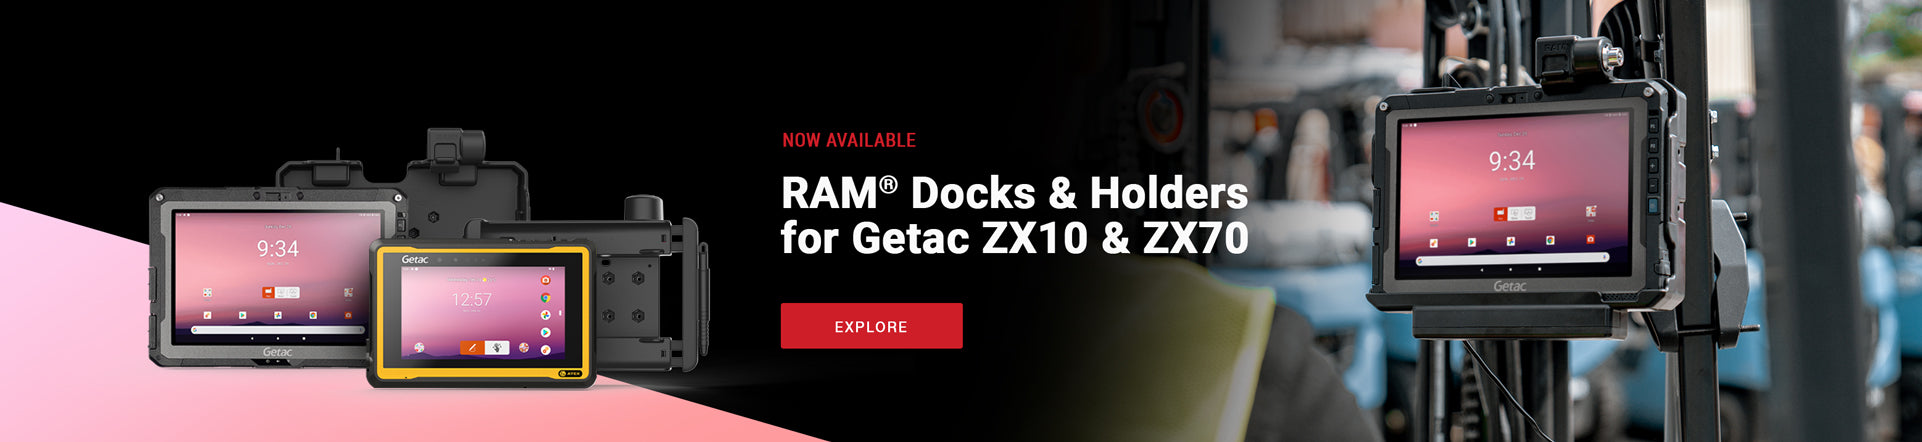 Homepage banner image featuring now available RAM Mounts Docks and Holders for Getac ZX10 and ZX70